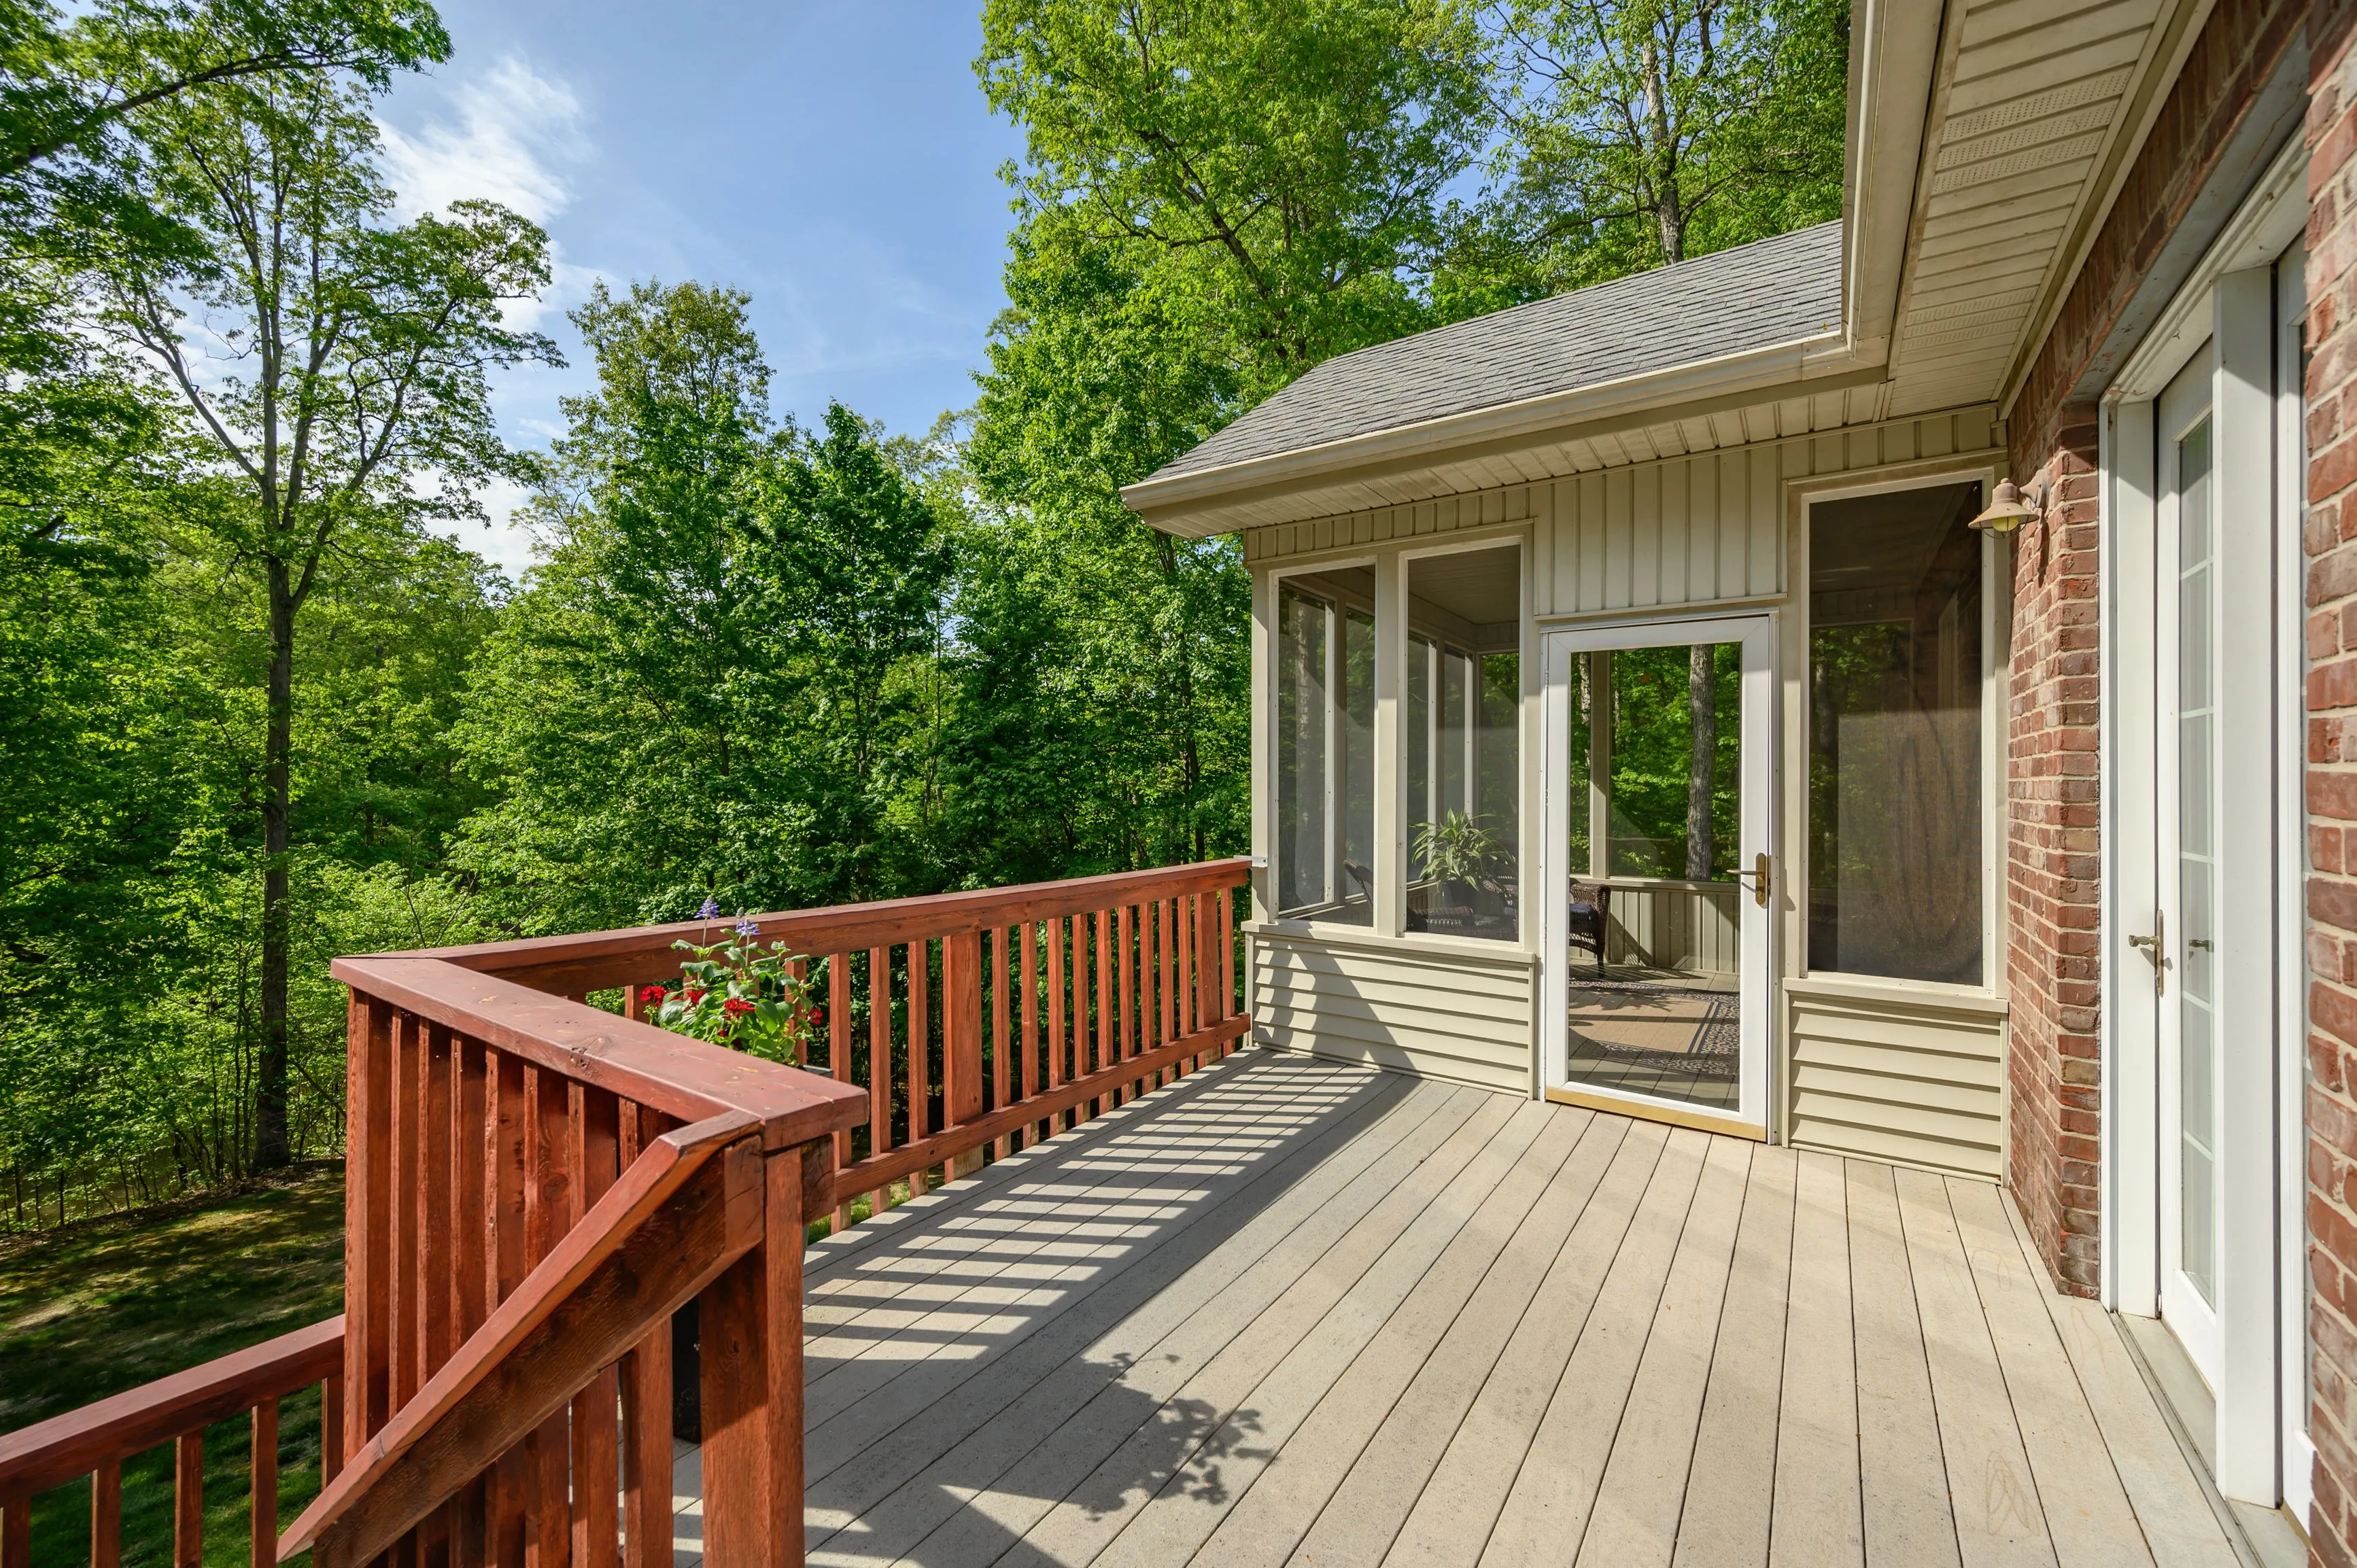 Wooden deck of a house with railing overlooking a lush green forest with a screened porch area to the side.